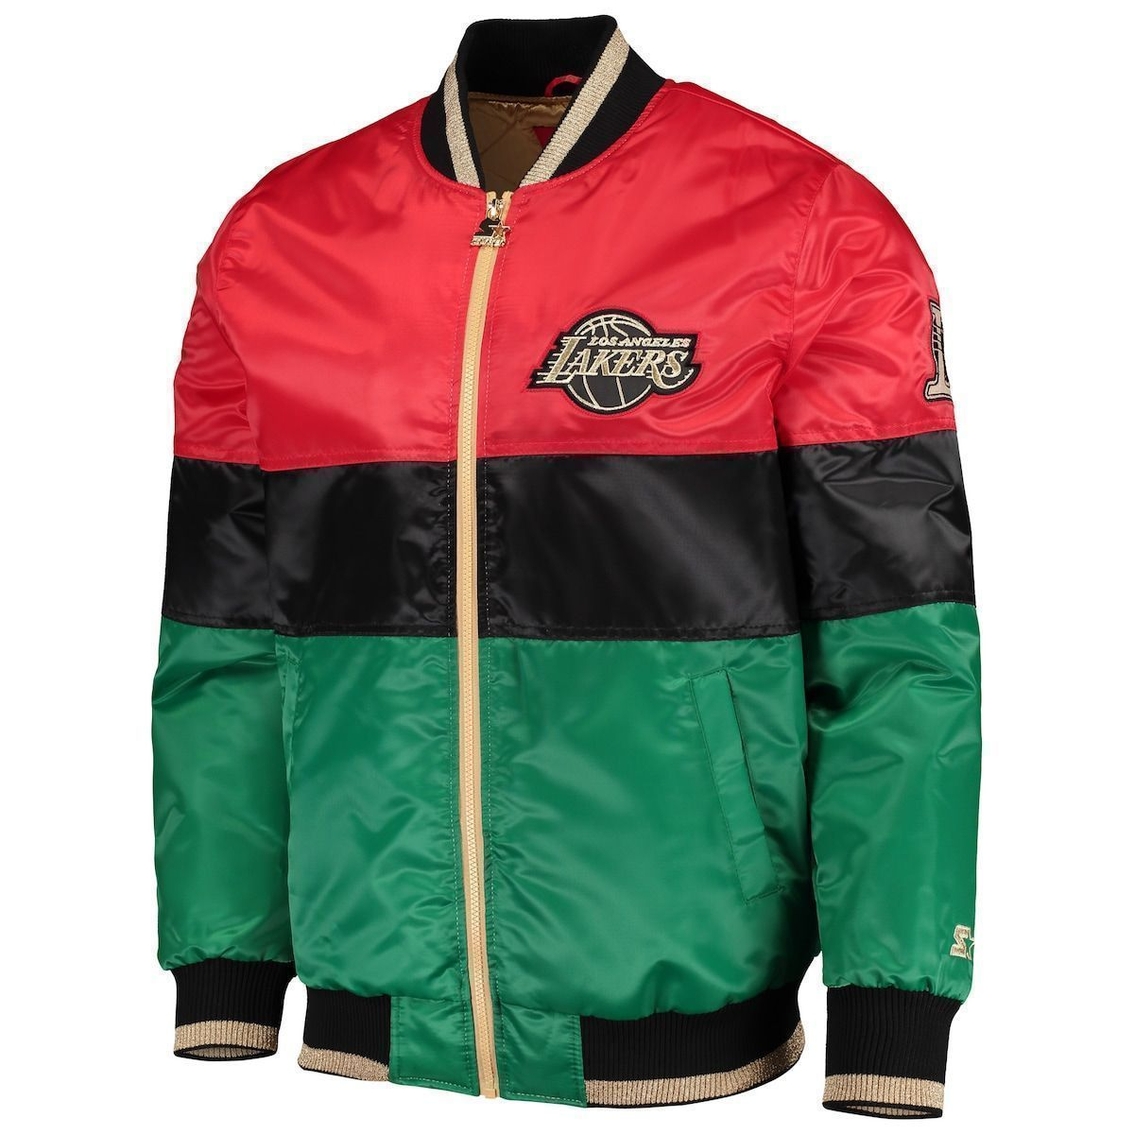 Starter Men's Red/Black/Green Los Angeles Lakers Black History Month NBA 75th Anniversary Full-Zip Jacket - Image 3 of 4